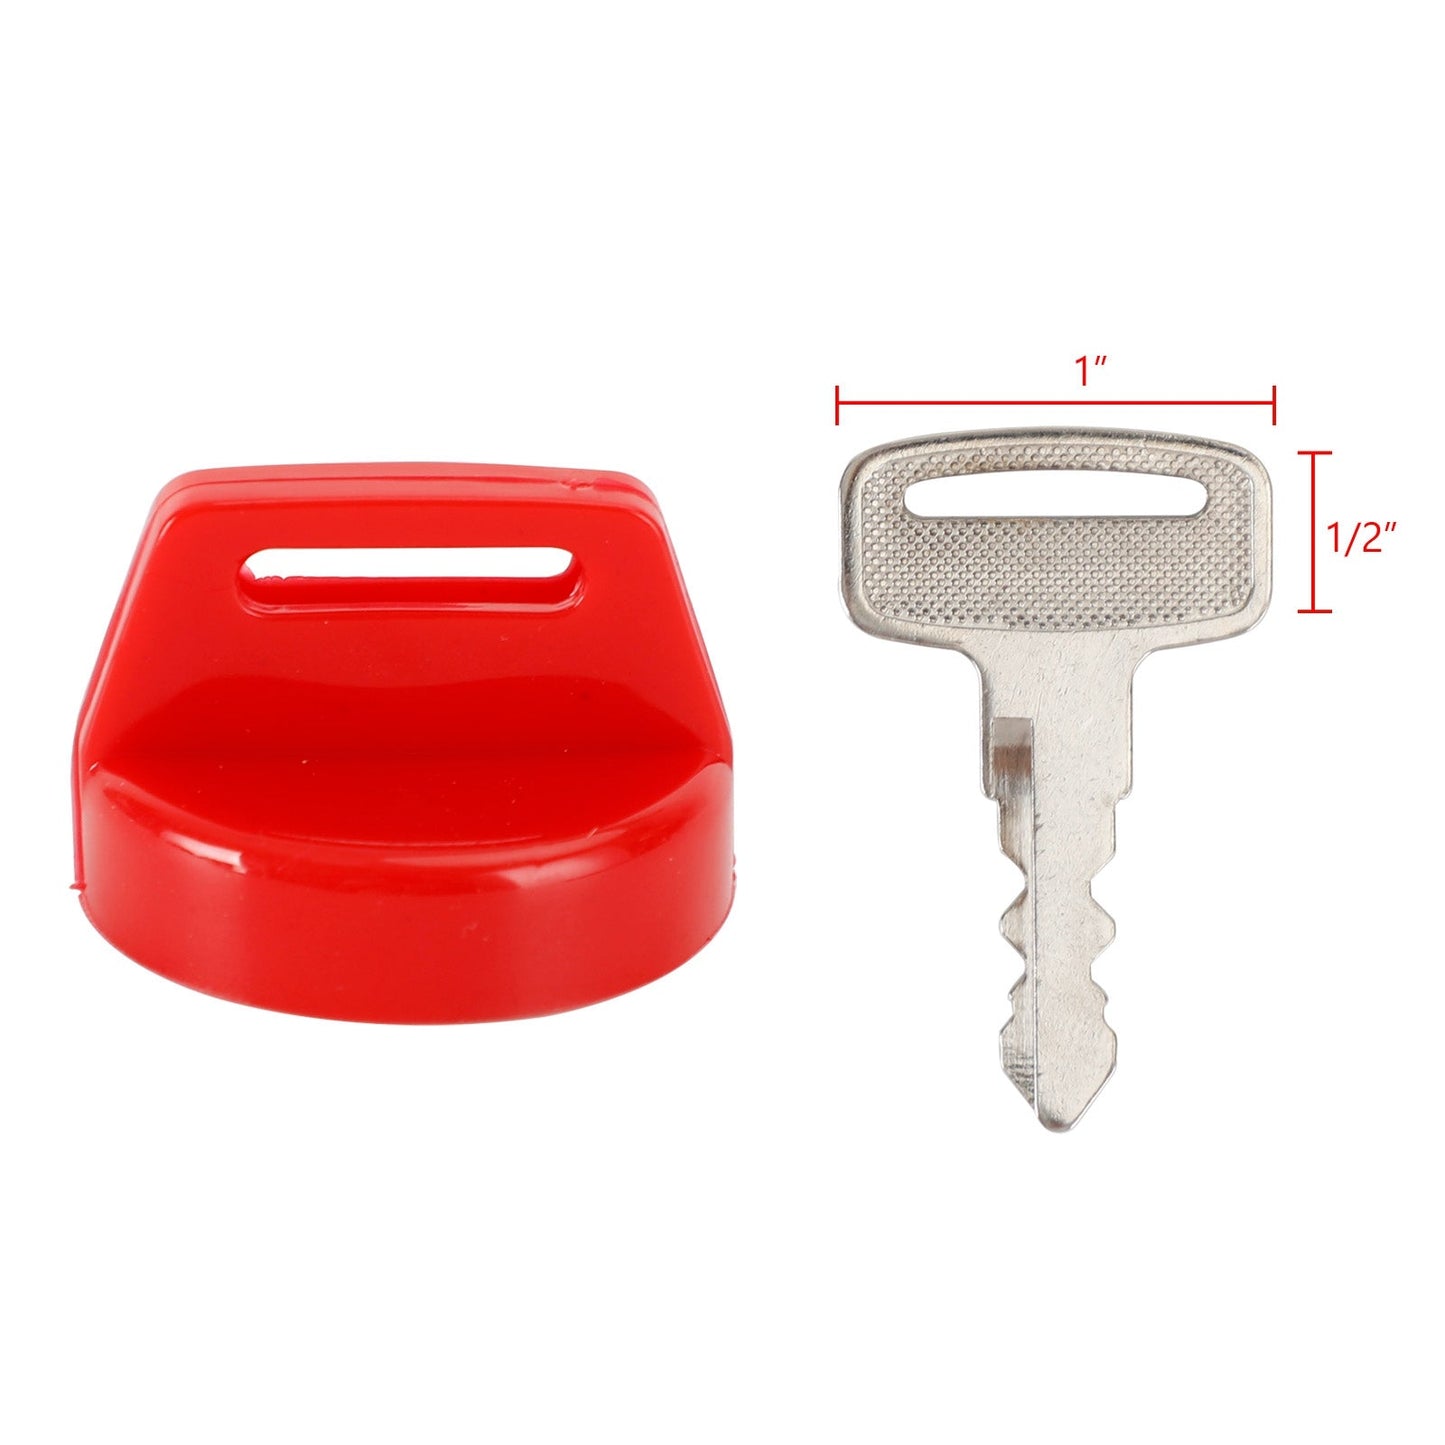 Red Ignition Key Cover w/Nut For Polaris RZR XP 1000 900 800 Ranger Sportsman